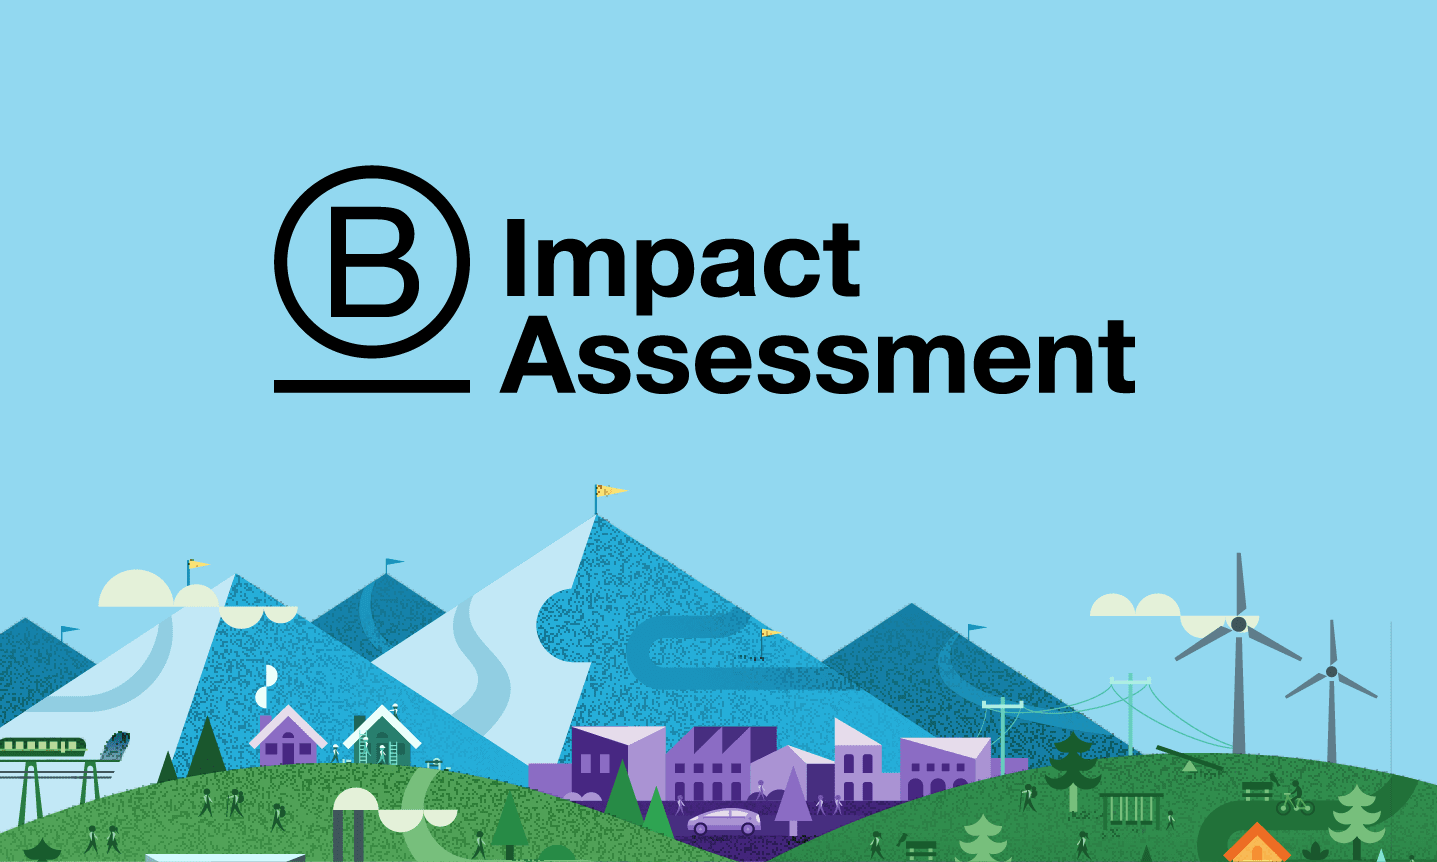 How do I get the B Impact Assessment right first time?